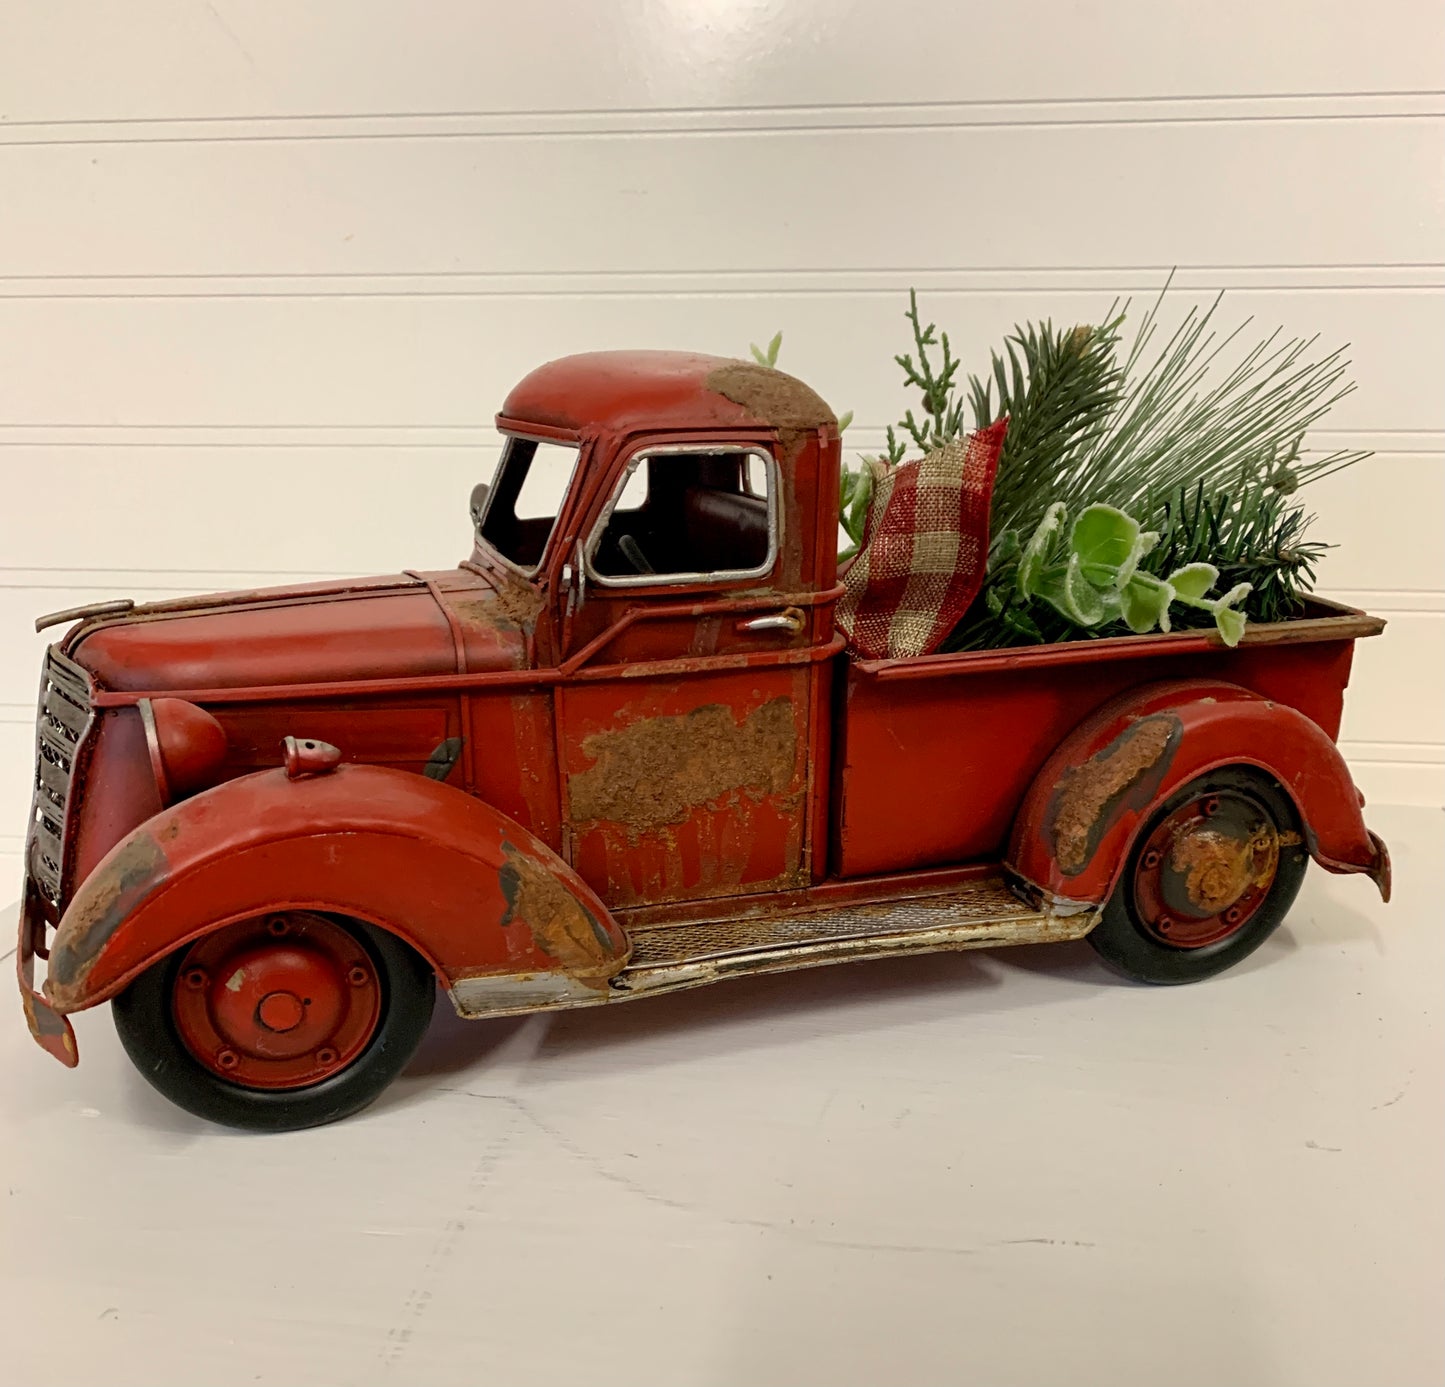 Vintage truck and greens